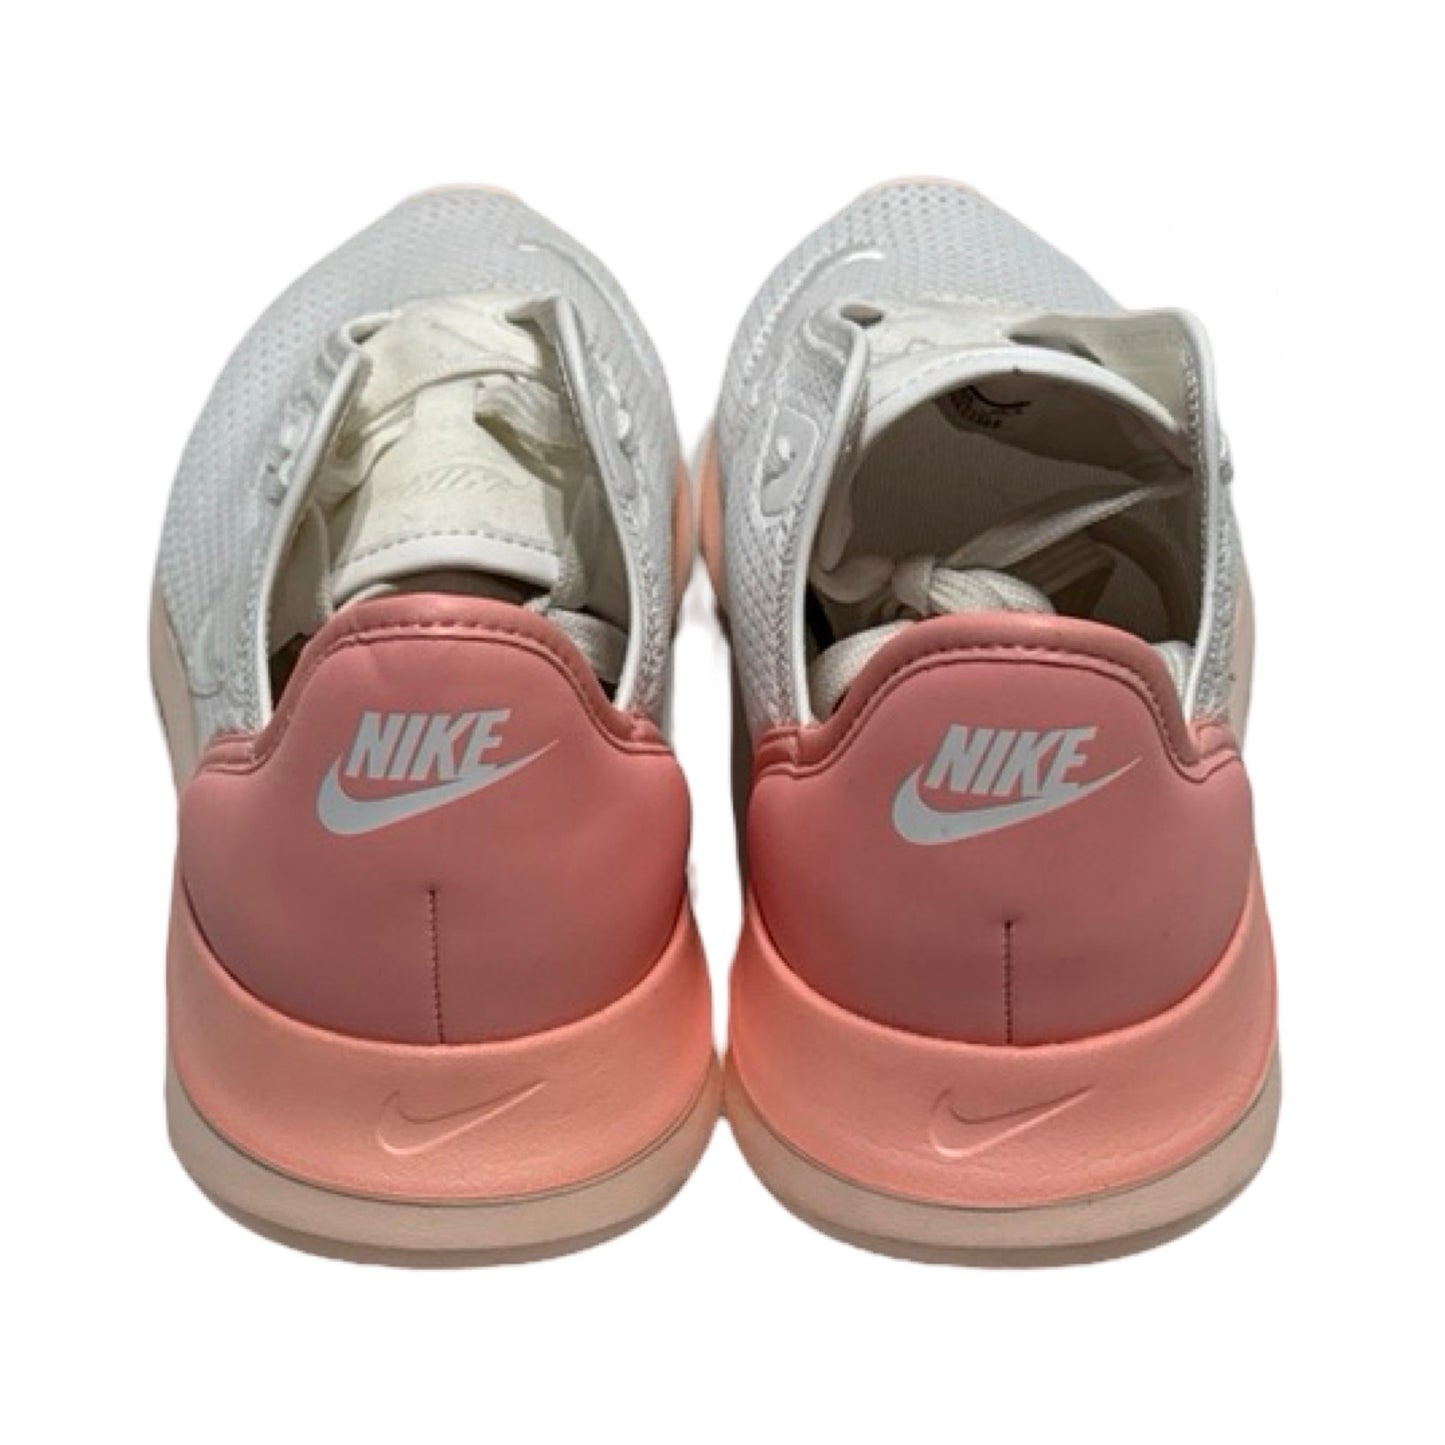 Pink Shoes Athletic Nike, Size 8.5